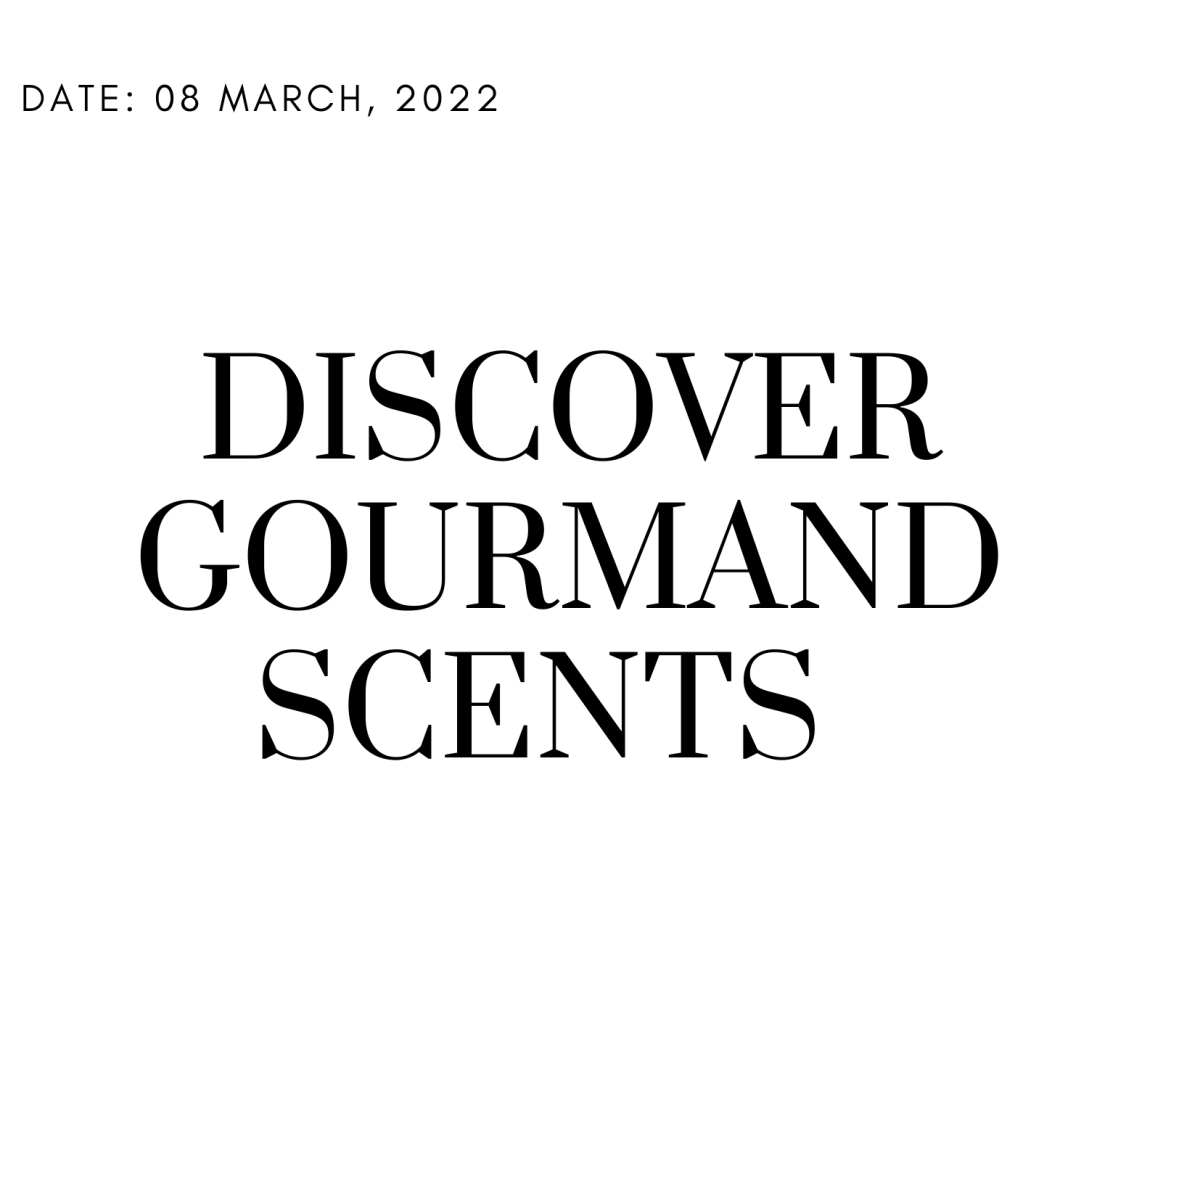 Discover Gourmand Scents